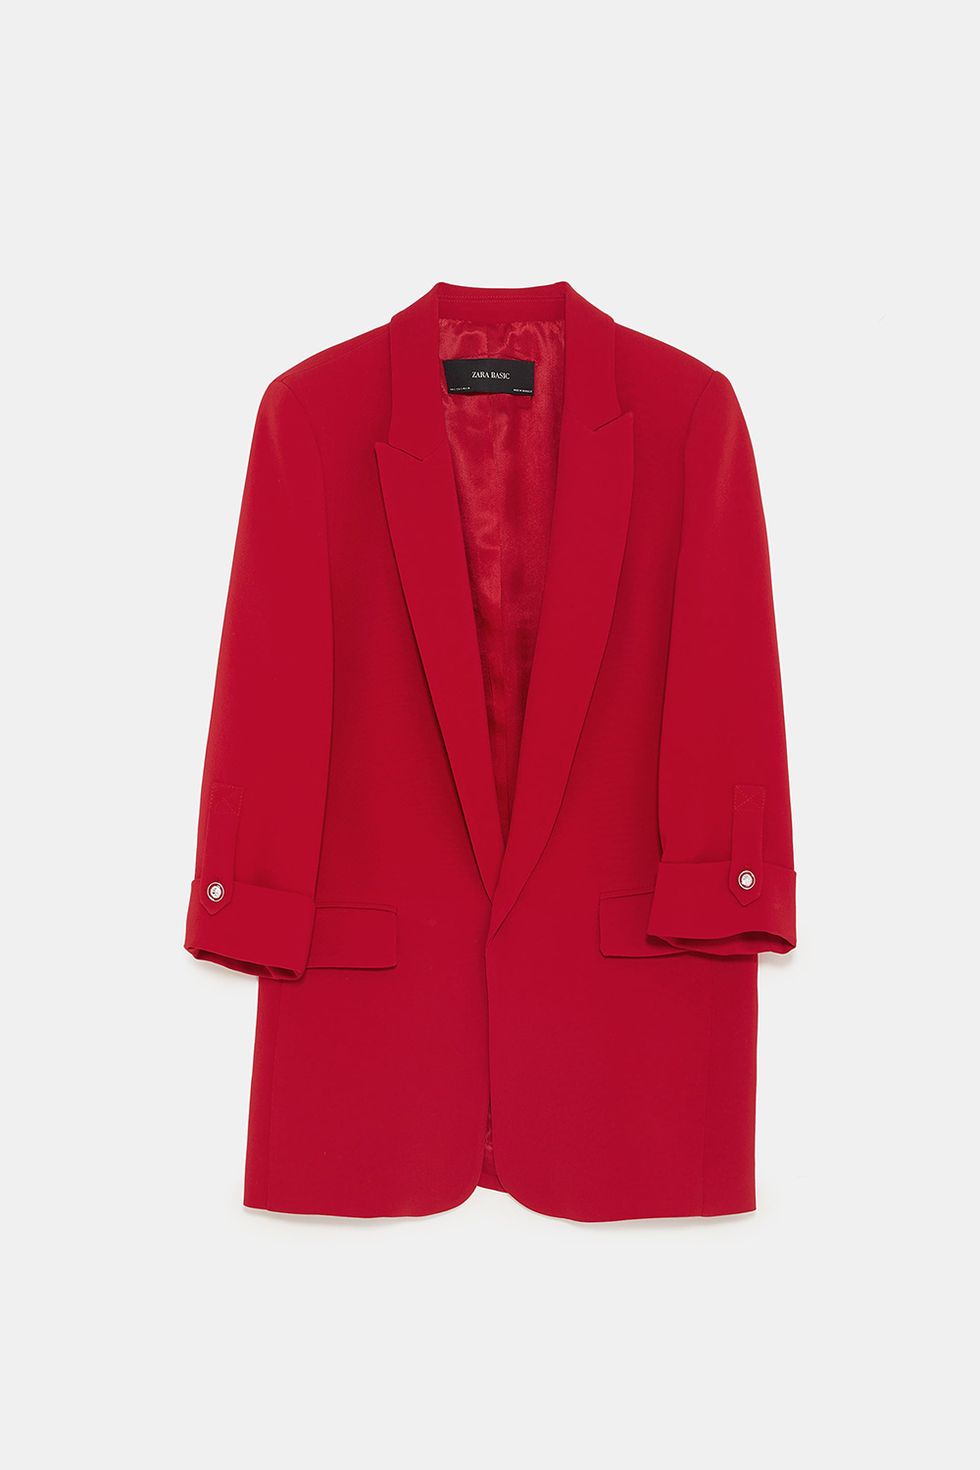 Clothing, Outerwear, Blazer, Jacket, Red, Sleeve, Button, Suit, Formal wear, Top, 